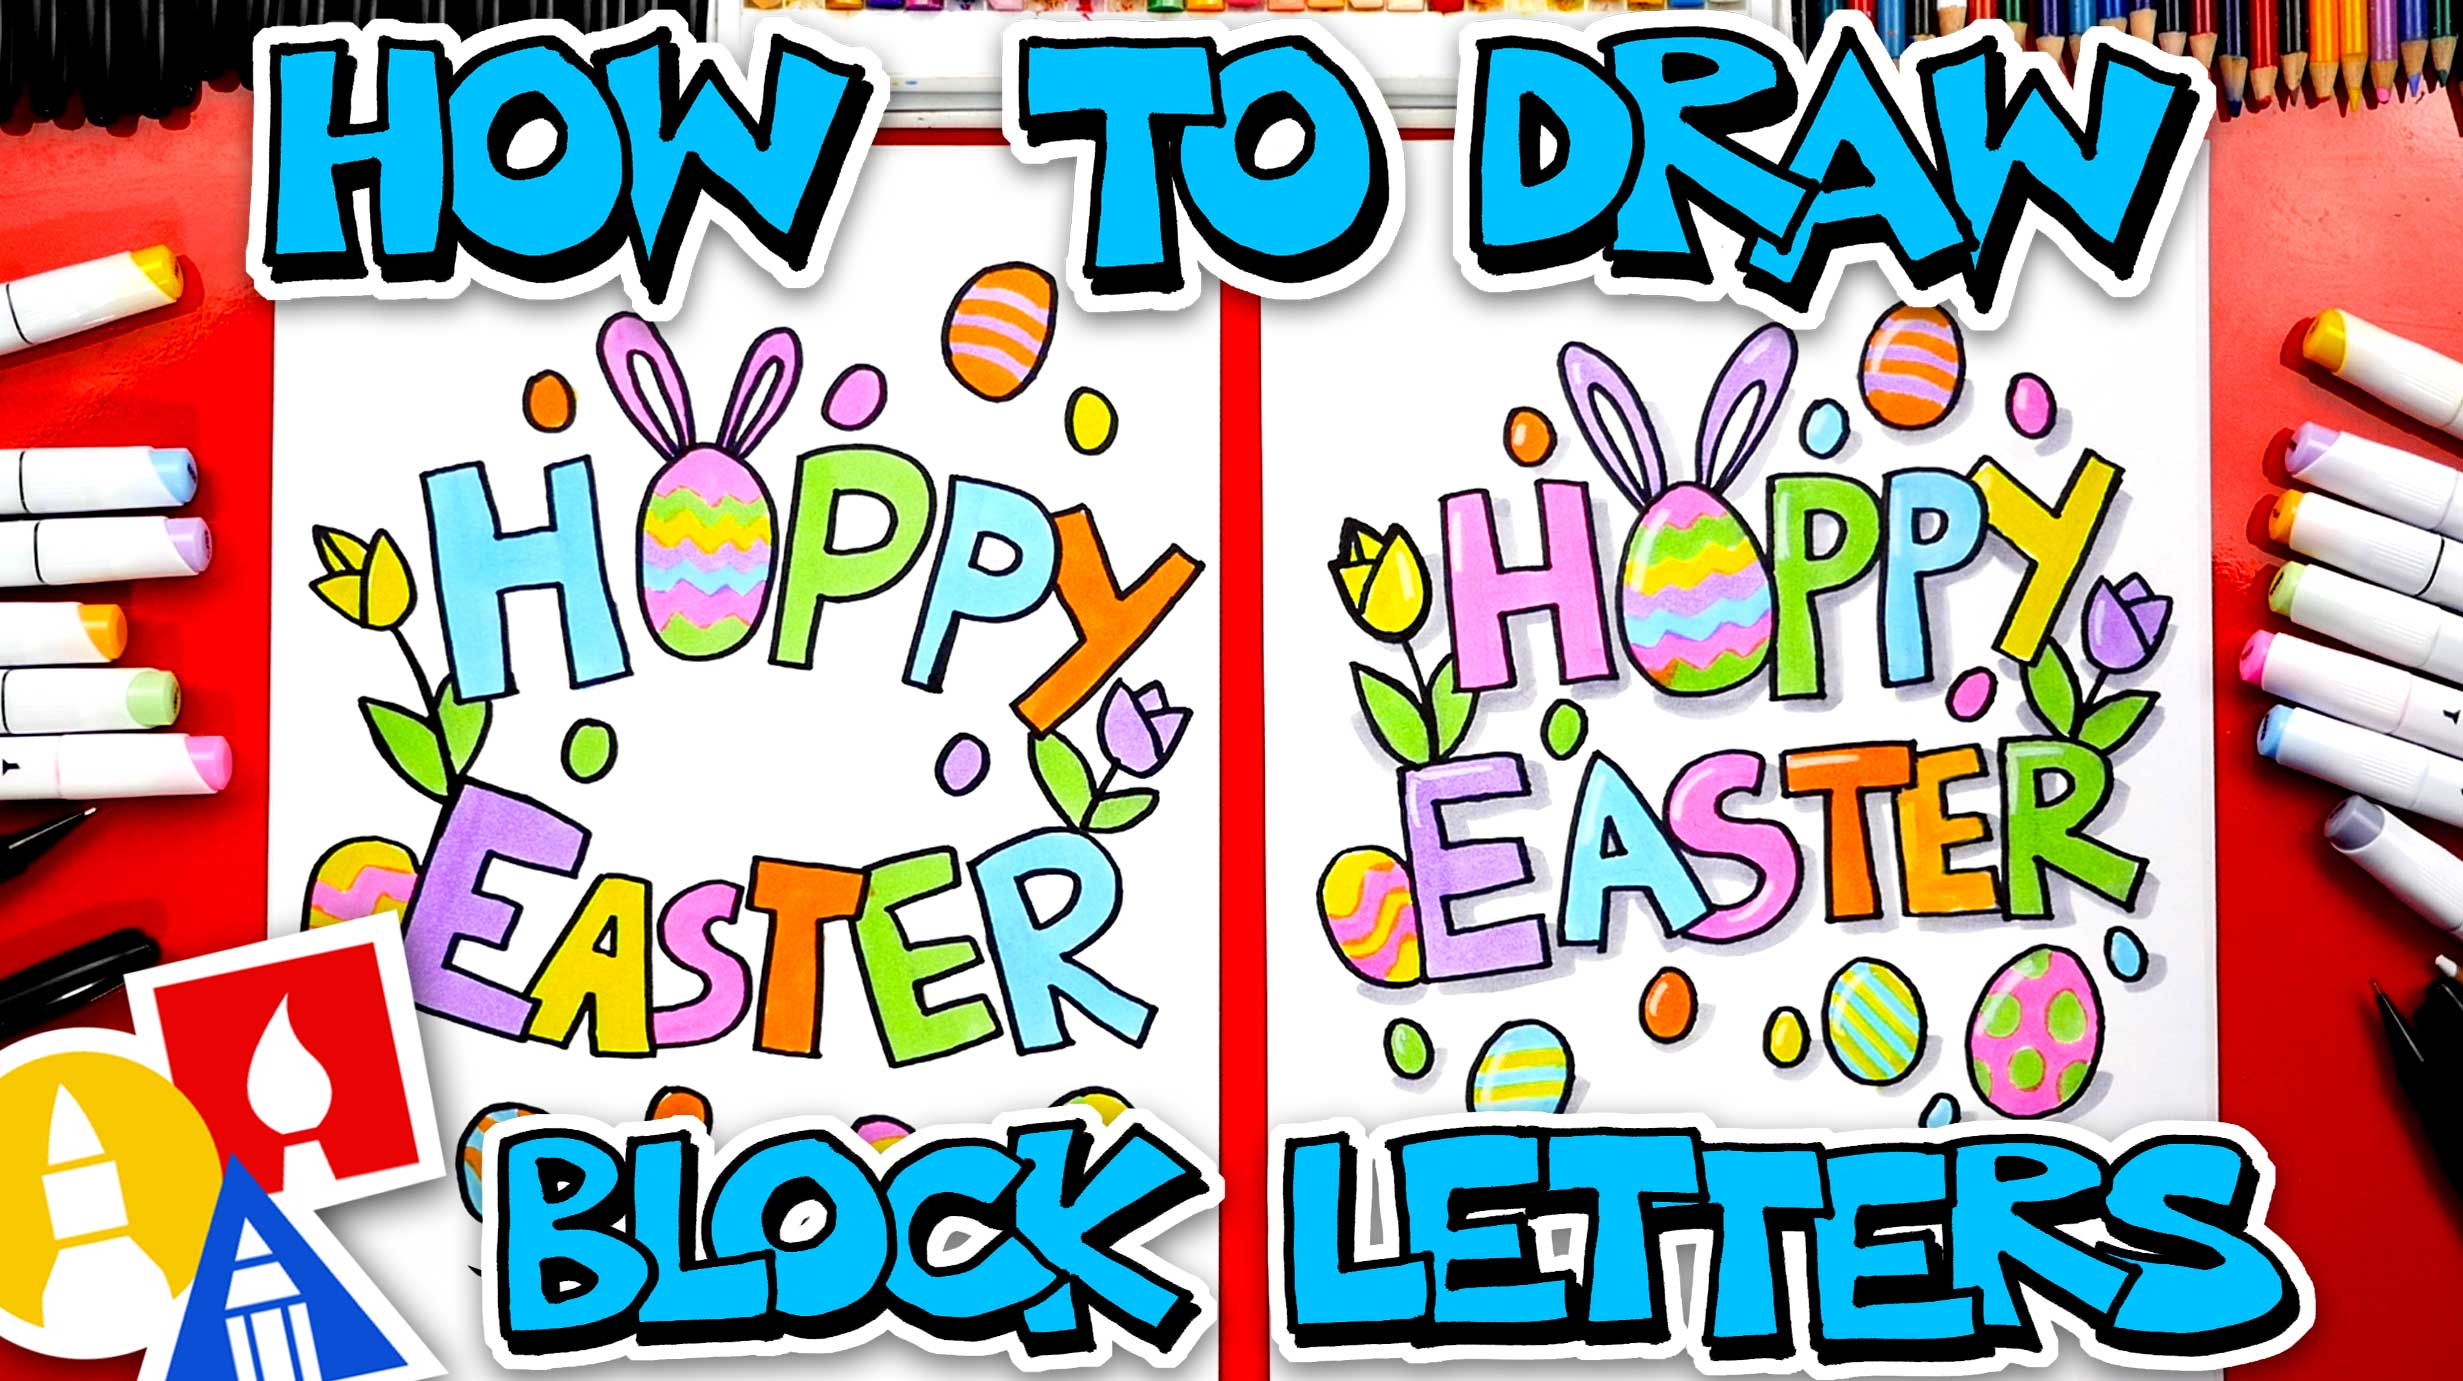 How To Draw Happy Easter In Block Letters Art For Kids Hub